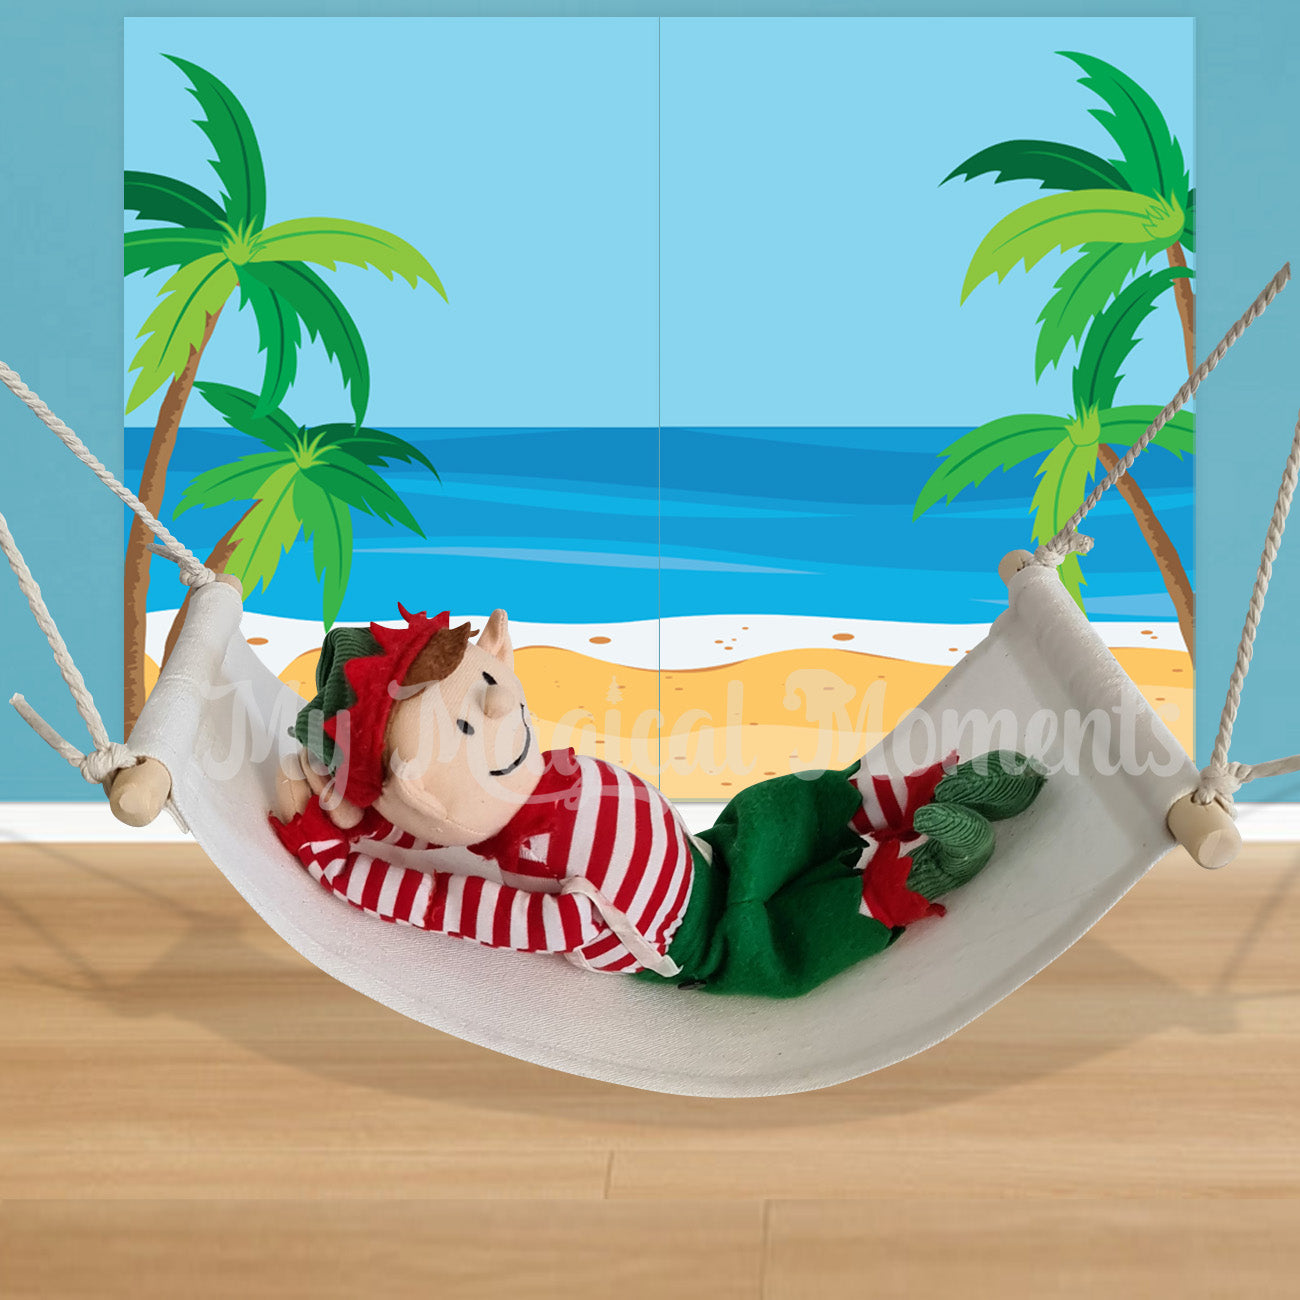 elf For Christmas chilling in a miniature hammock